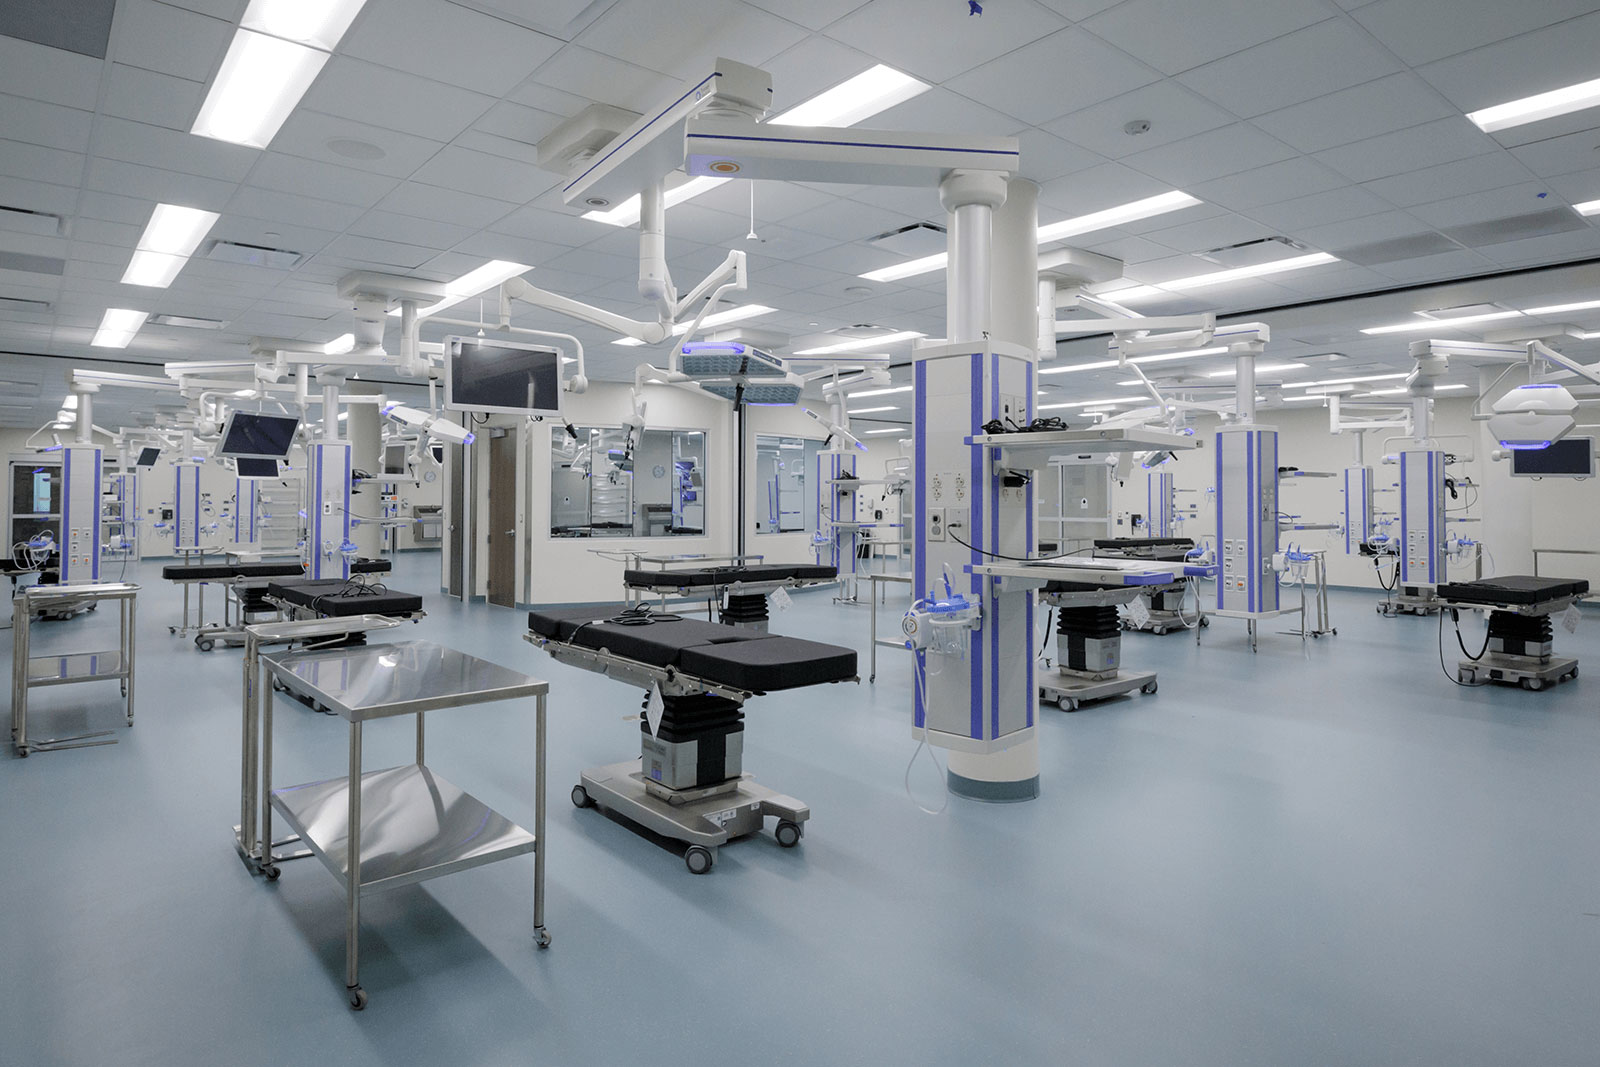 Surgical Skills Rooms & Equipment